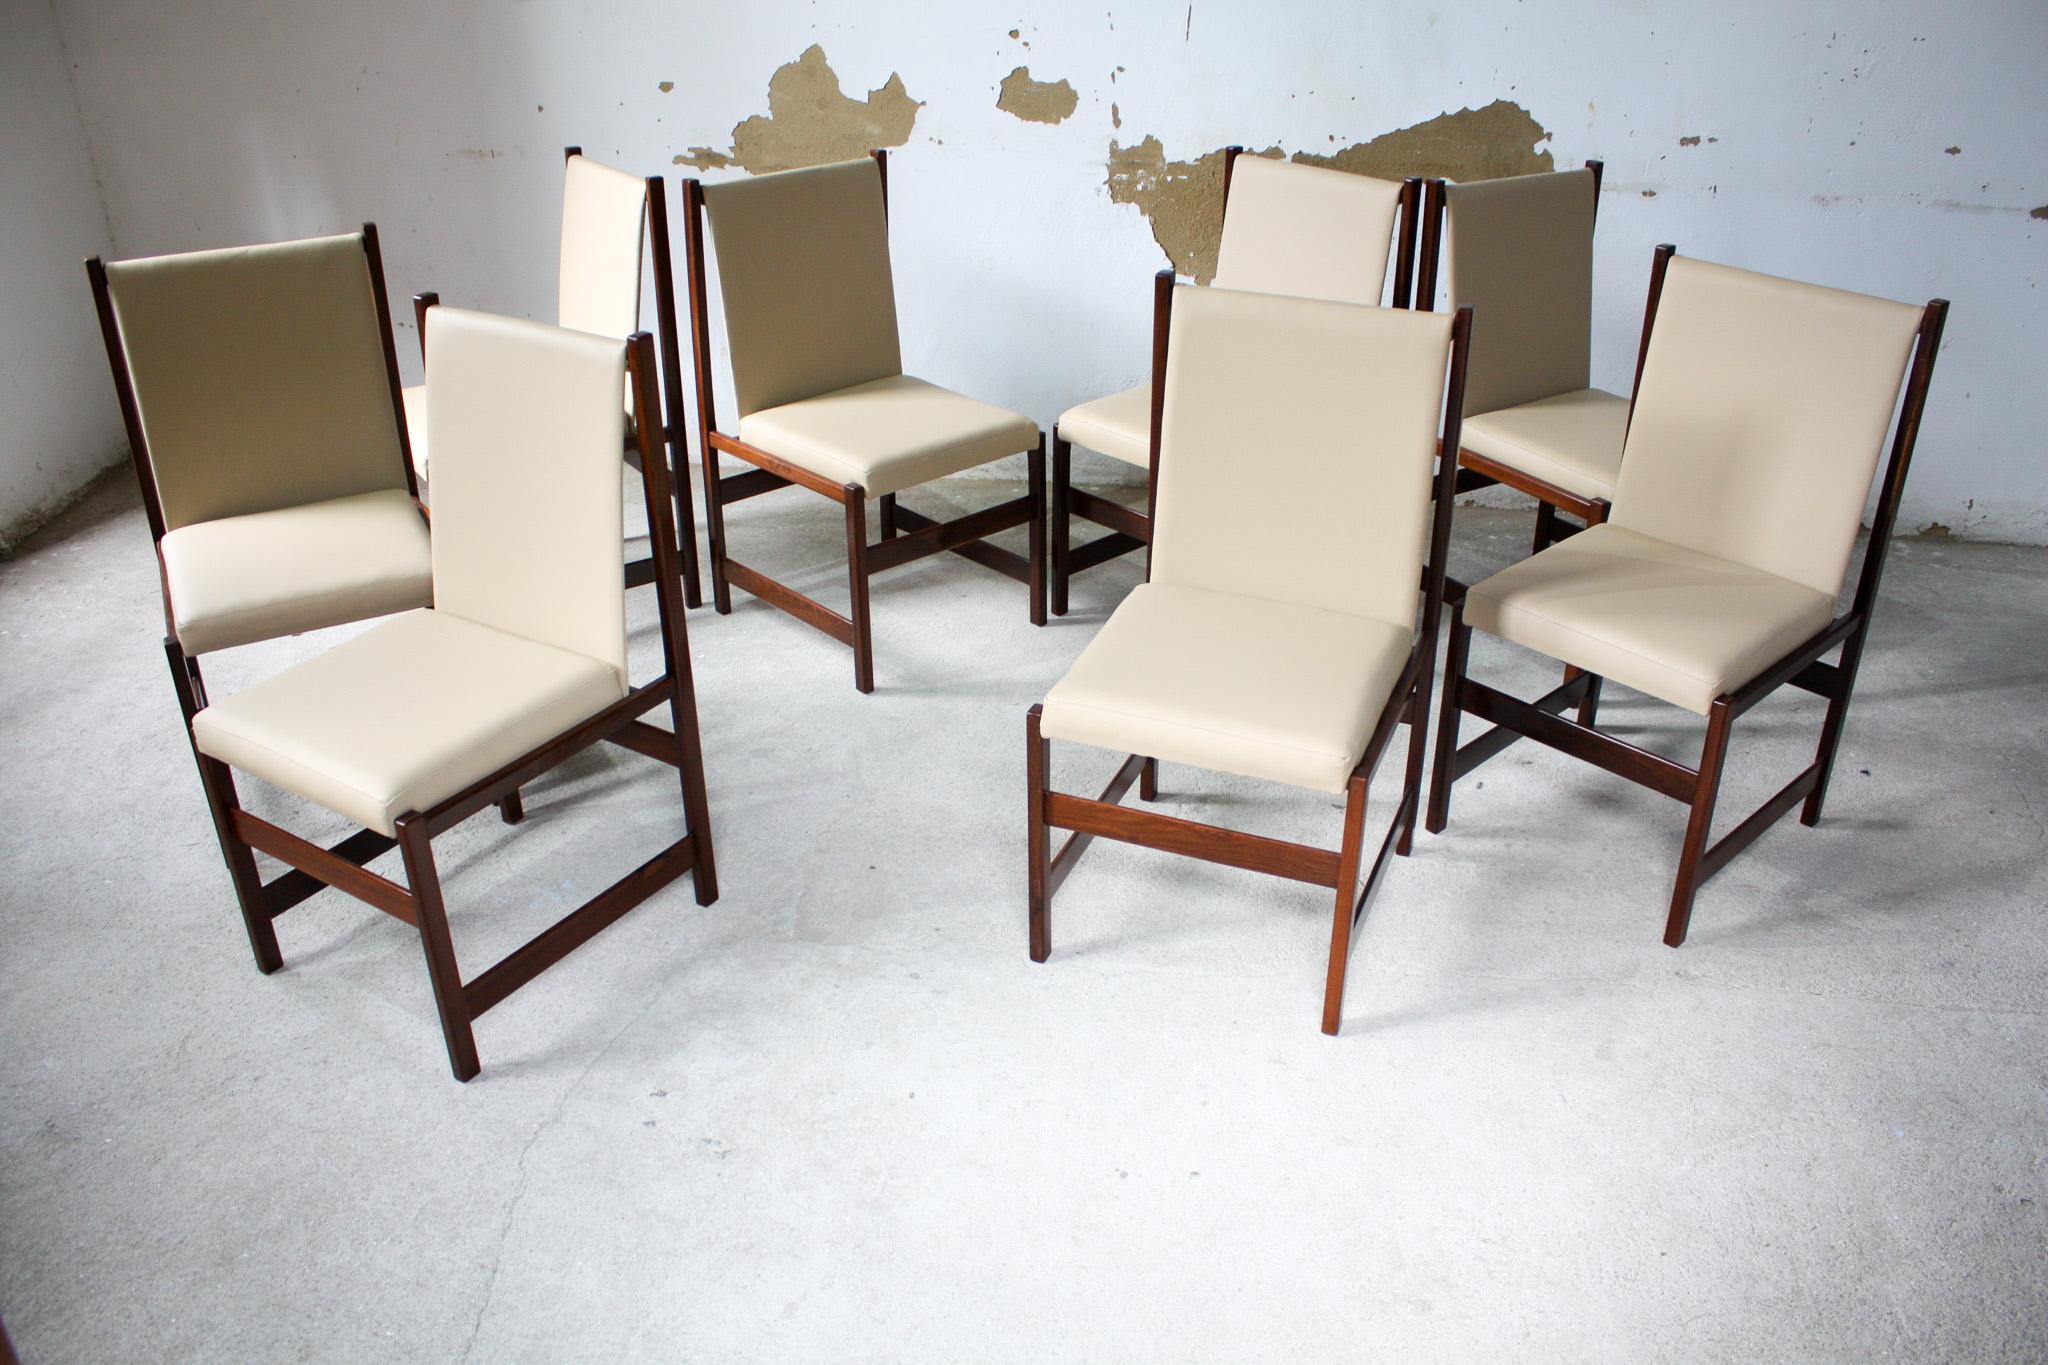 Woodwork Mid-Century Modern 8 Dining Chair Set in Hardwood&Beige Leather by Celina 1960s